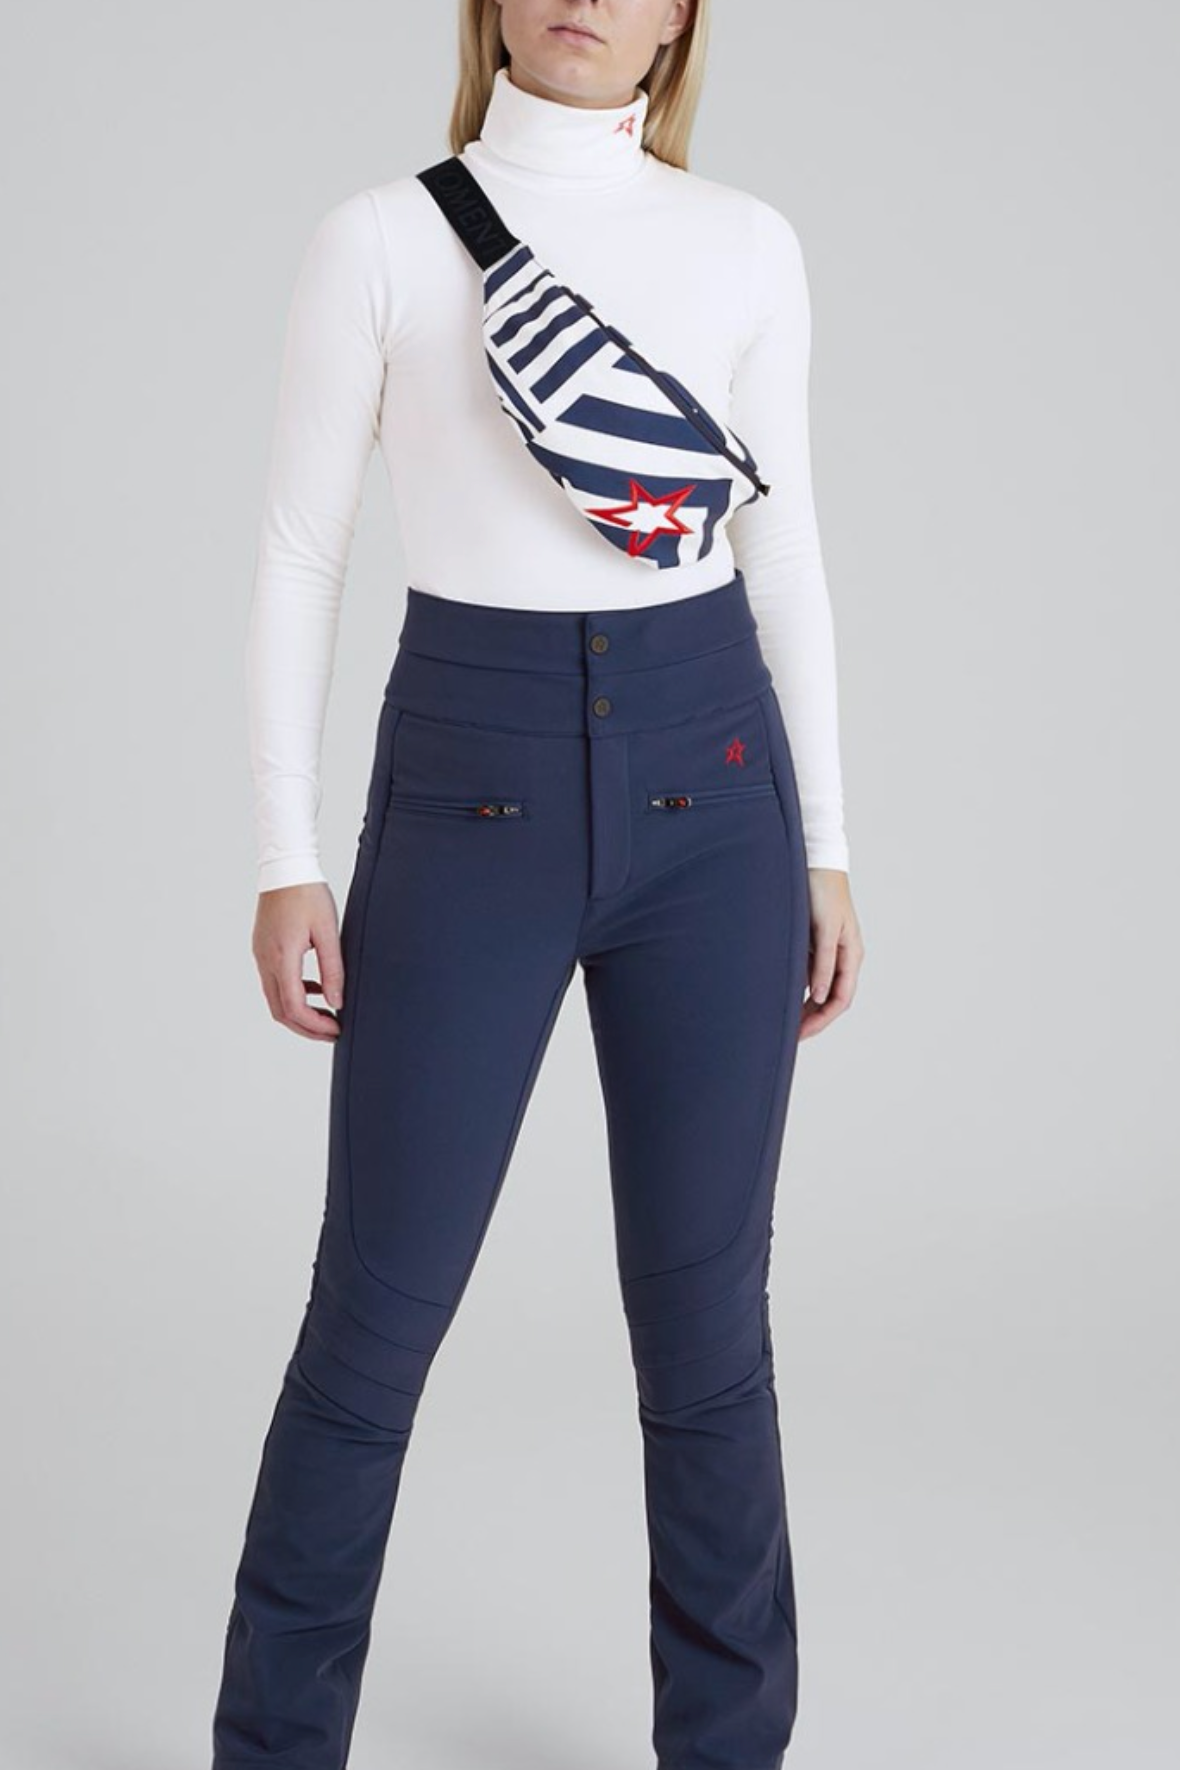 Perfect Moment Aurora High Waist Flare Ski Pant in Navy